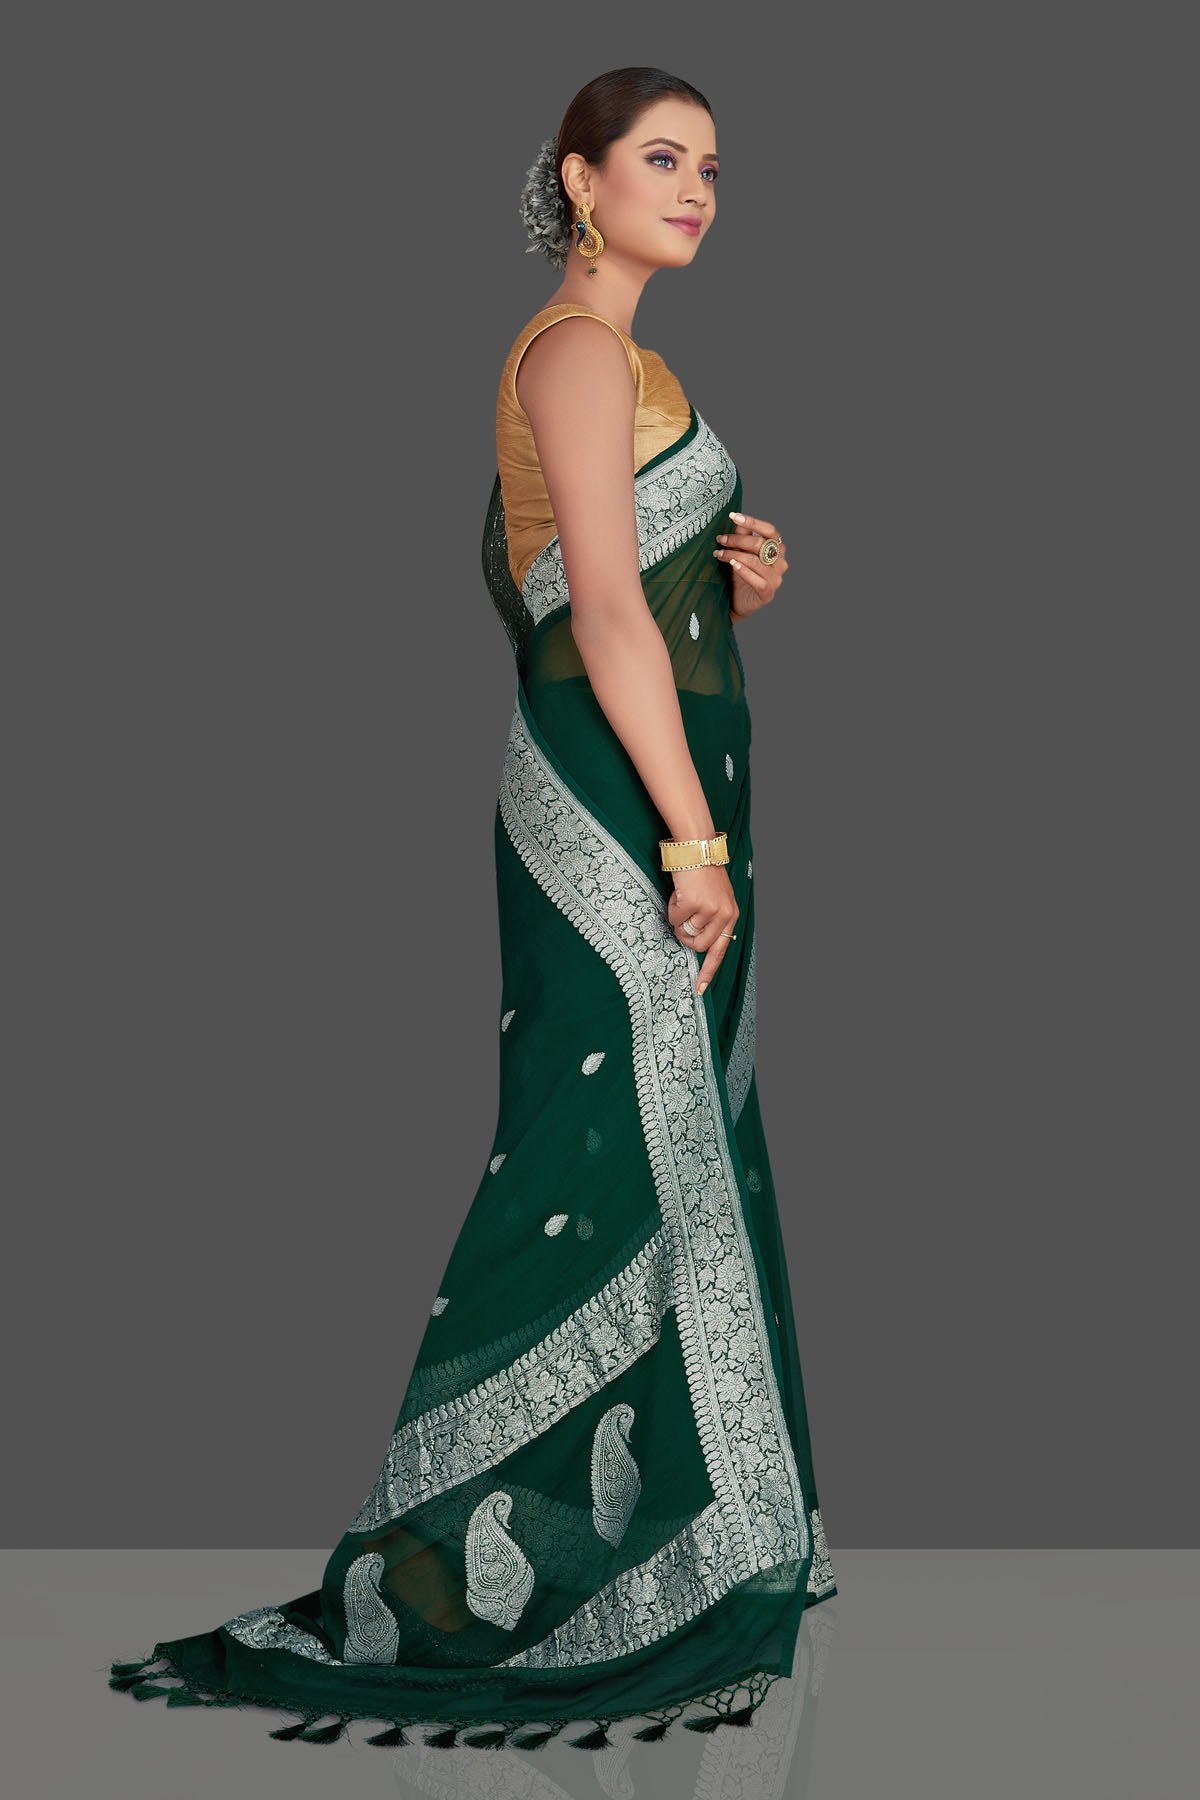 Buy beautiful dark green  chiffon georgette Banarasi sari online in USA with silver zari border. Look your best on special occasions with stunning Banarasi sarees, pure silk saris, tussar saris, handwoven sarees from Pure Elegance Indian saree store in USA.-side